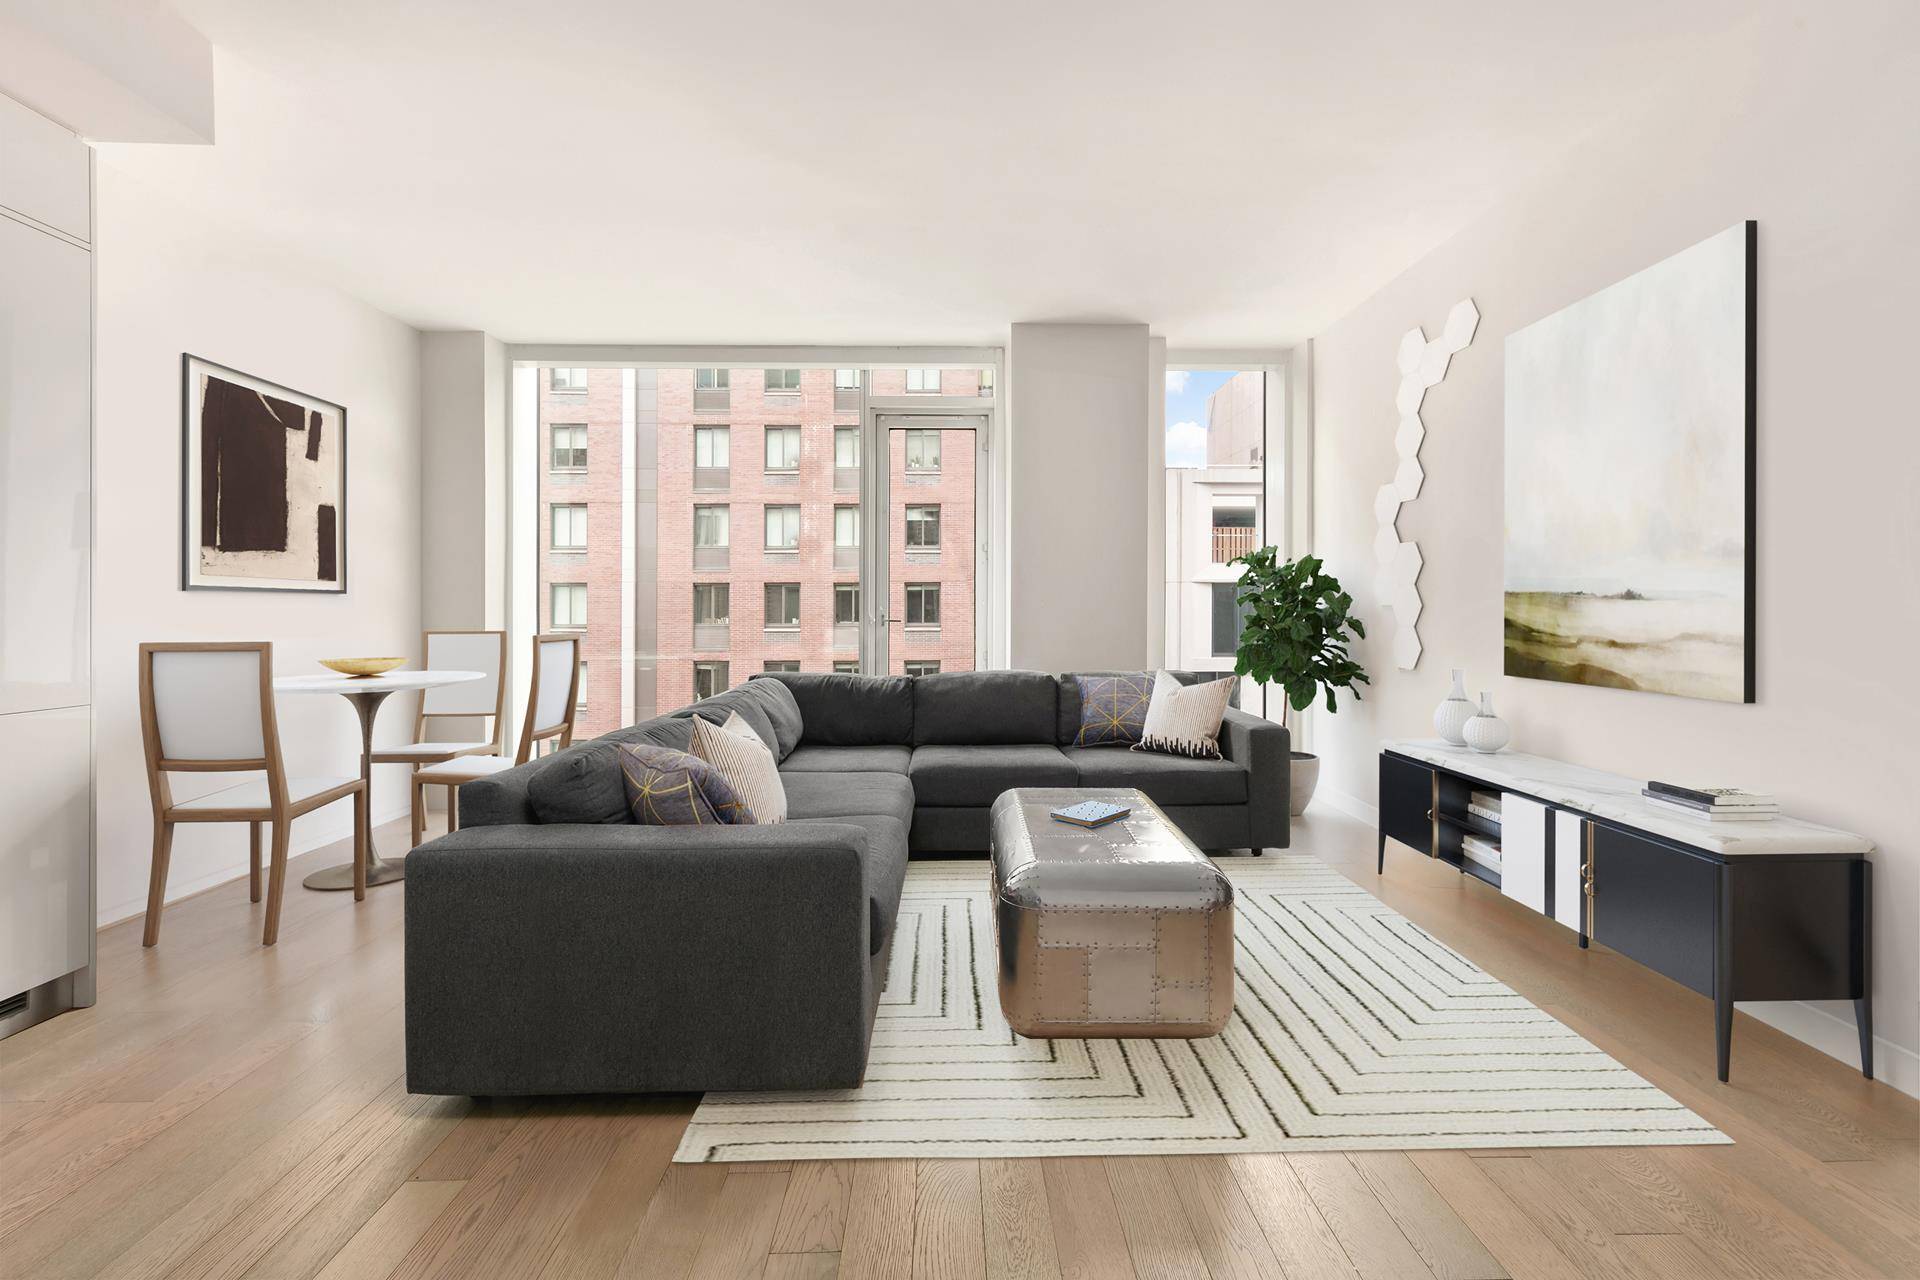 Introducing 6A at Charlie West Experience elevated living in this deluxe 1 bedroom, 1 bath residence featuring a 20 foot deep living room with floor to ceiling windows.